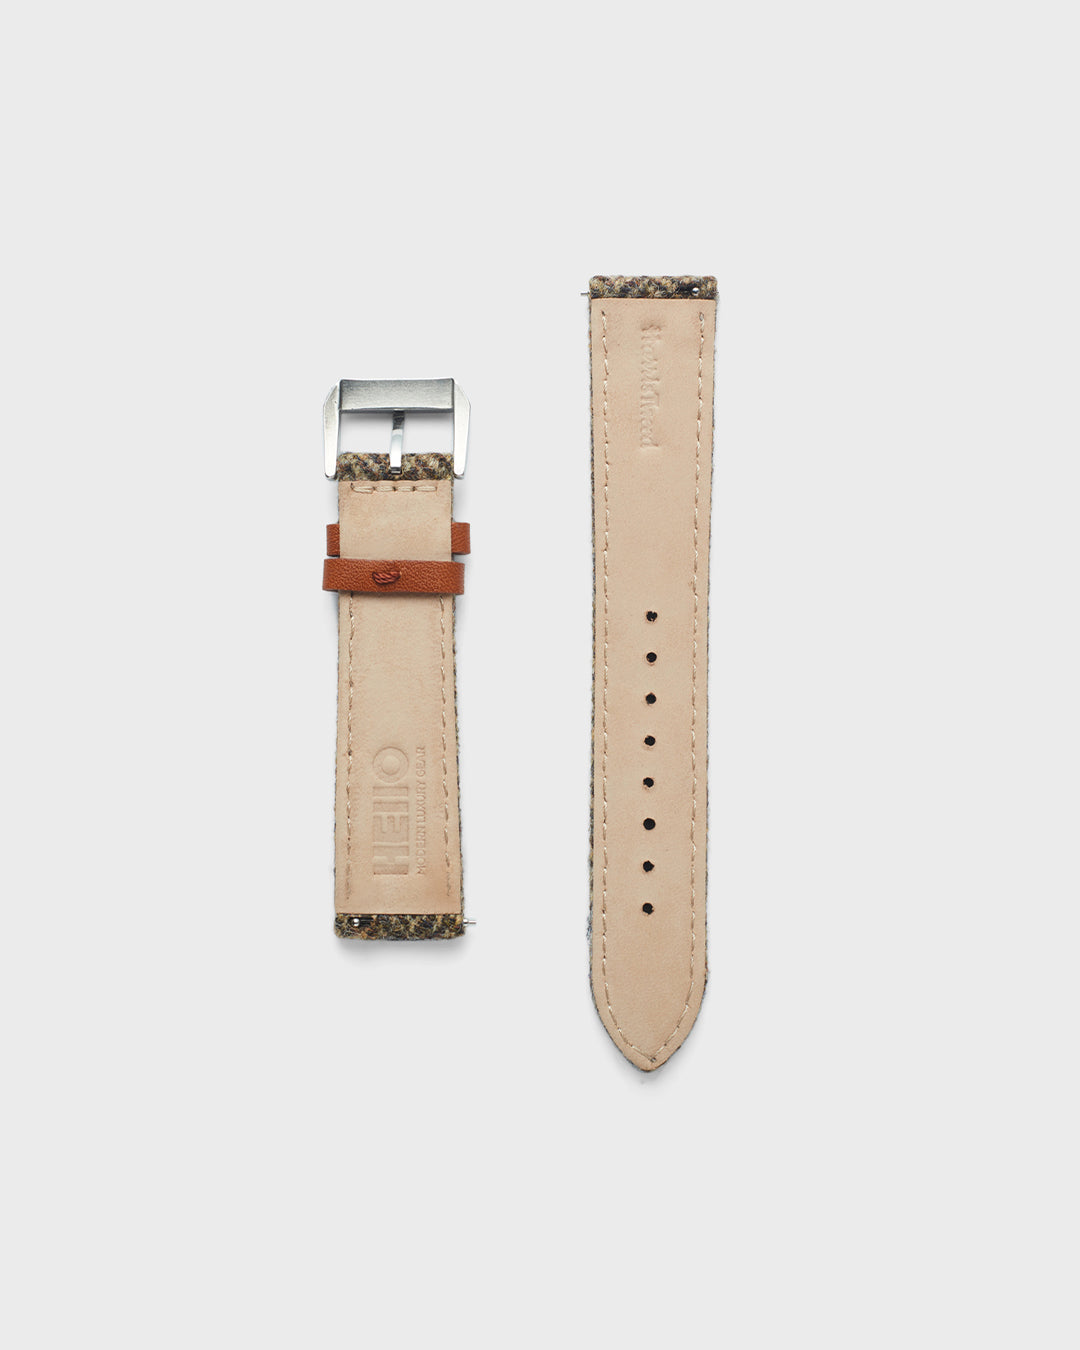 EMBRACE STRAP - FOR QUARTZ, MECHANICAL & SMART WATCHES [Parade Stitch in Harris Tweed] HEllO